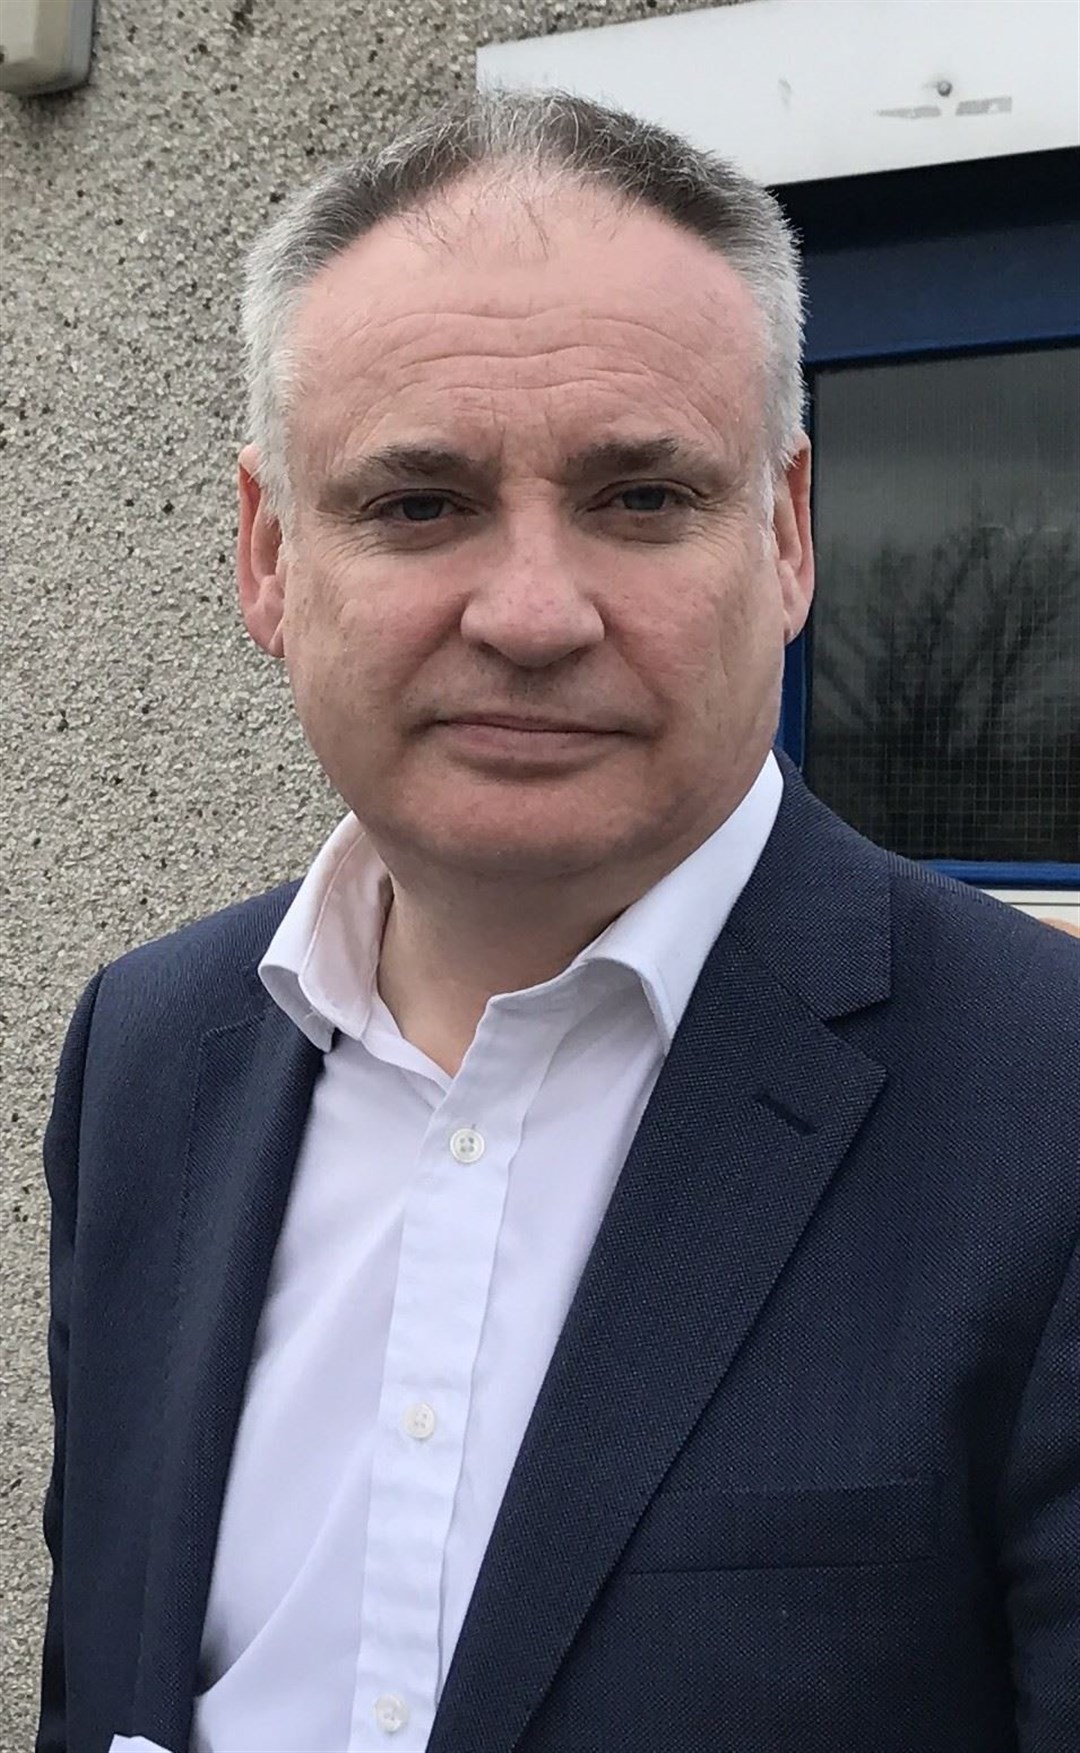 Richard Lochhead MSP has criticised his Moray political colleague for not representing the EU wishes of the majority in the area.